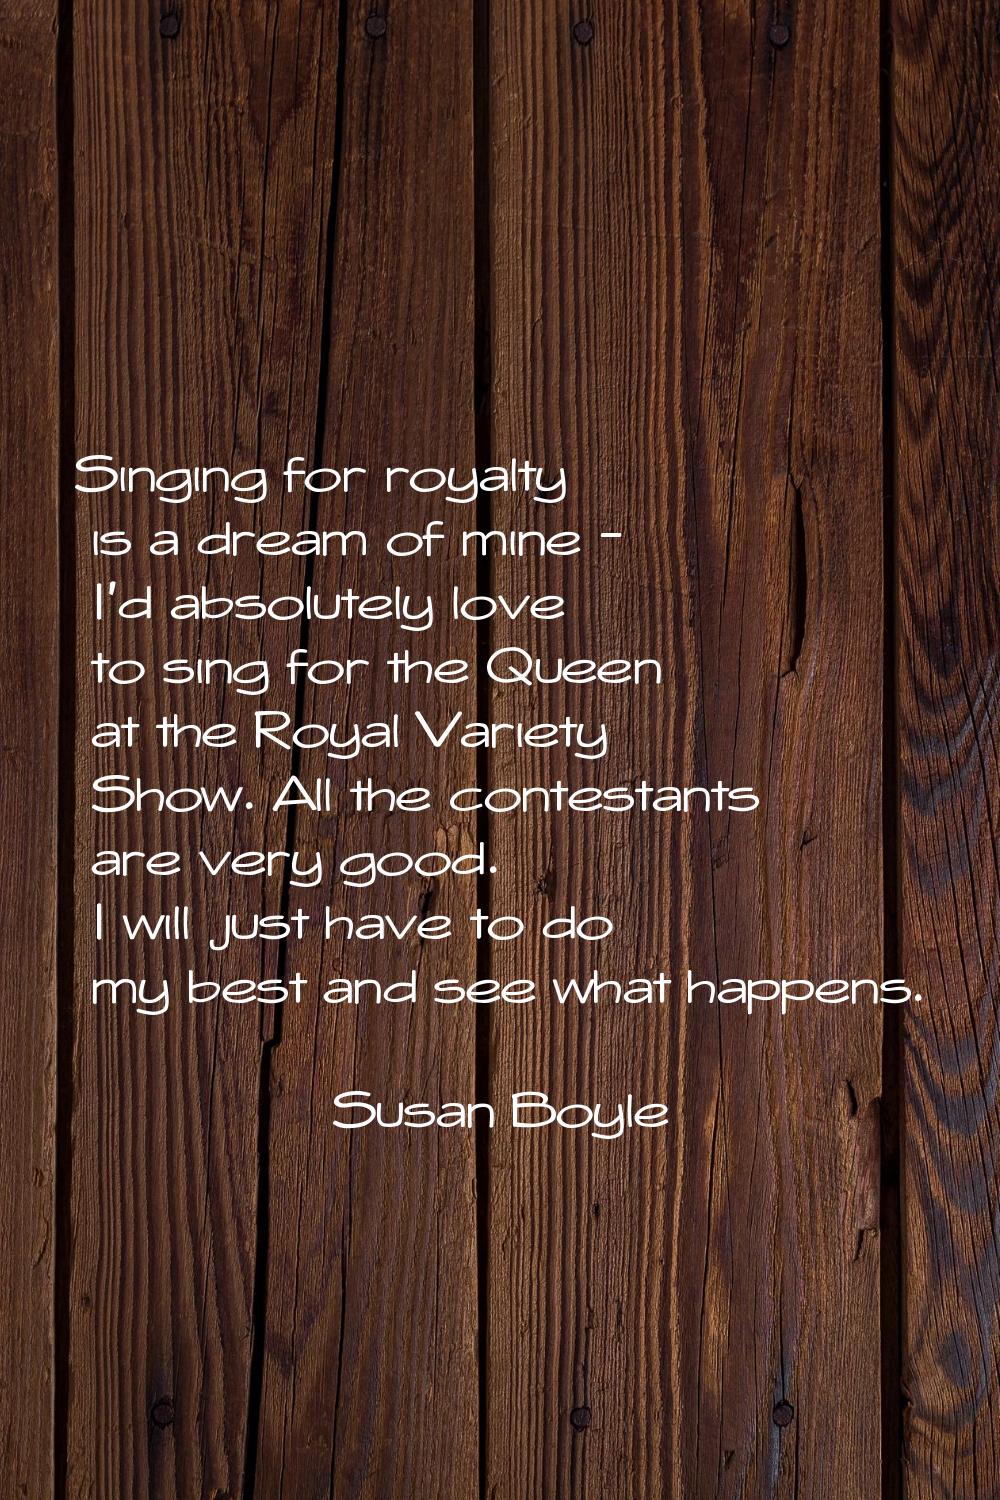 Singing for royalty is a dream of mine - I'd absolutely love to sing for the Queen at the Royal Var